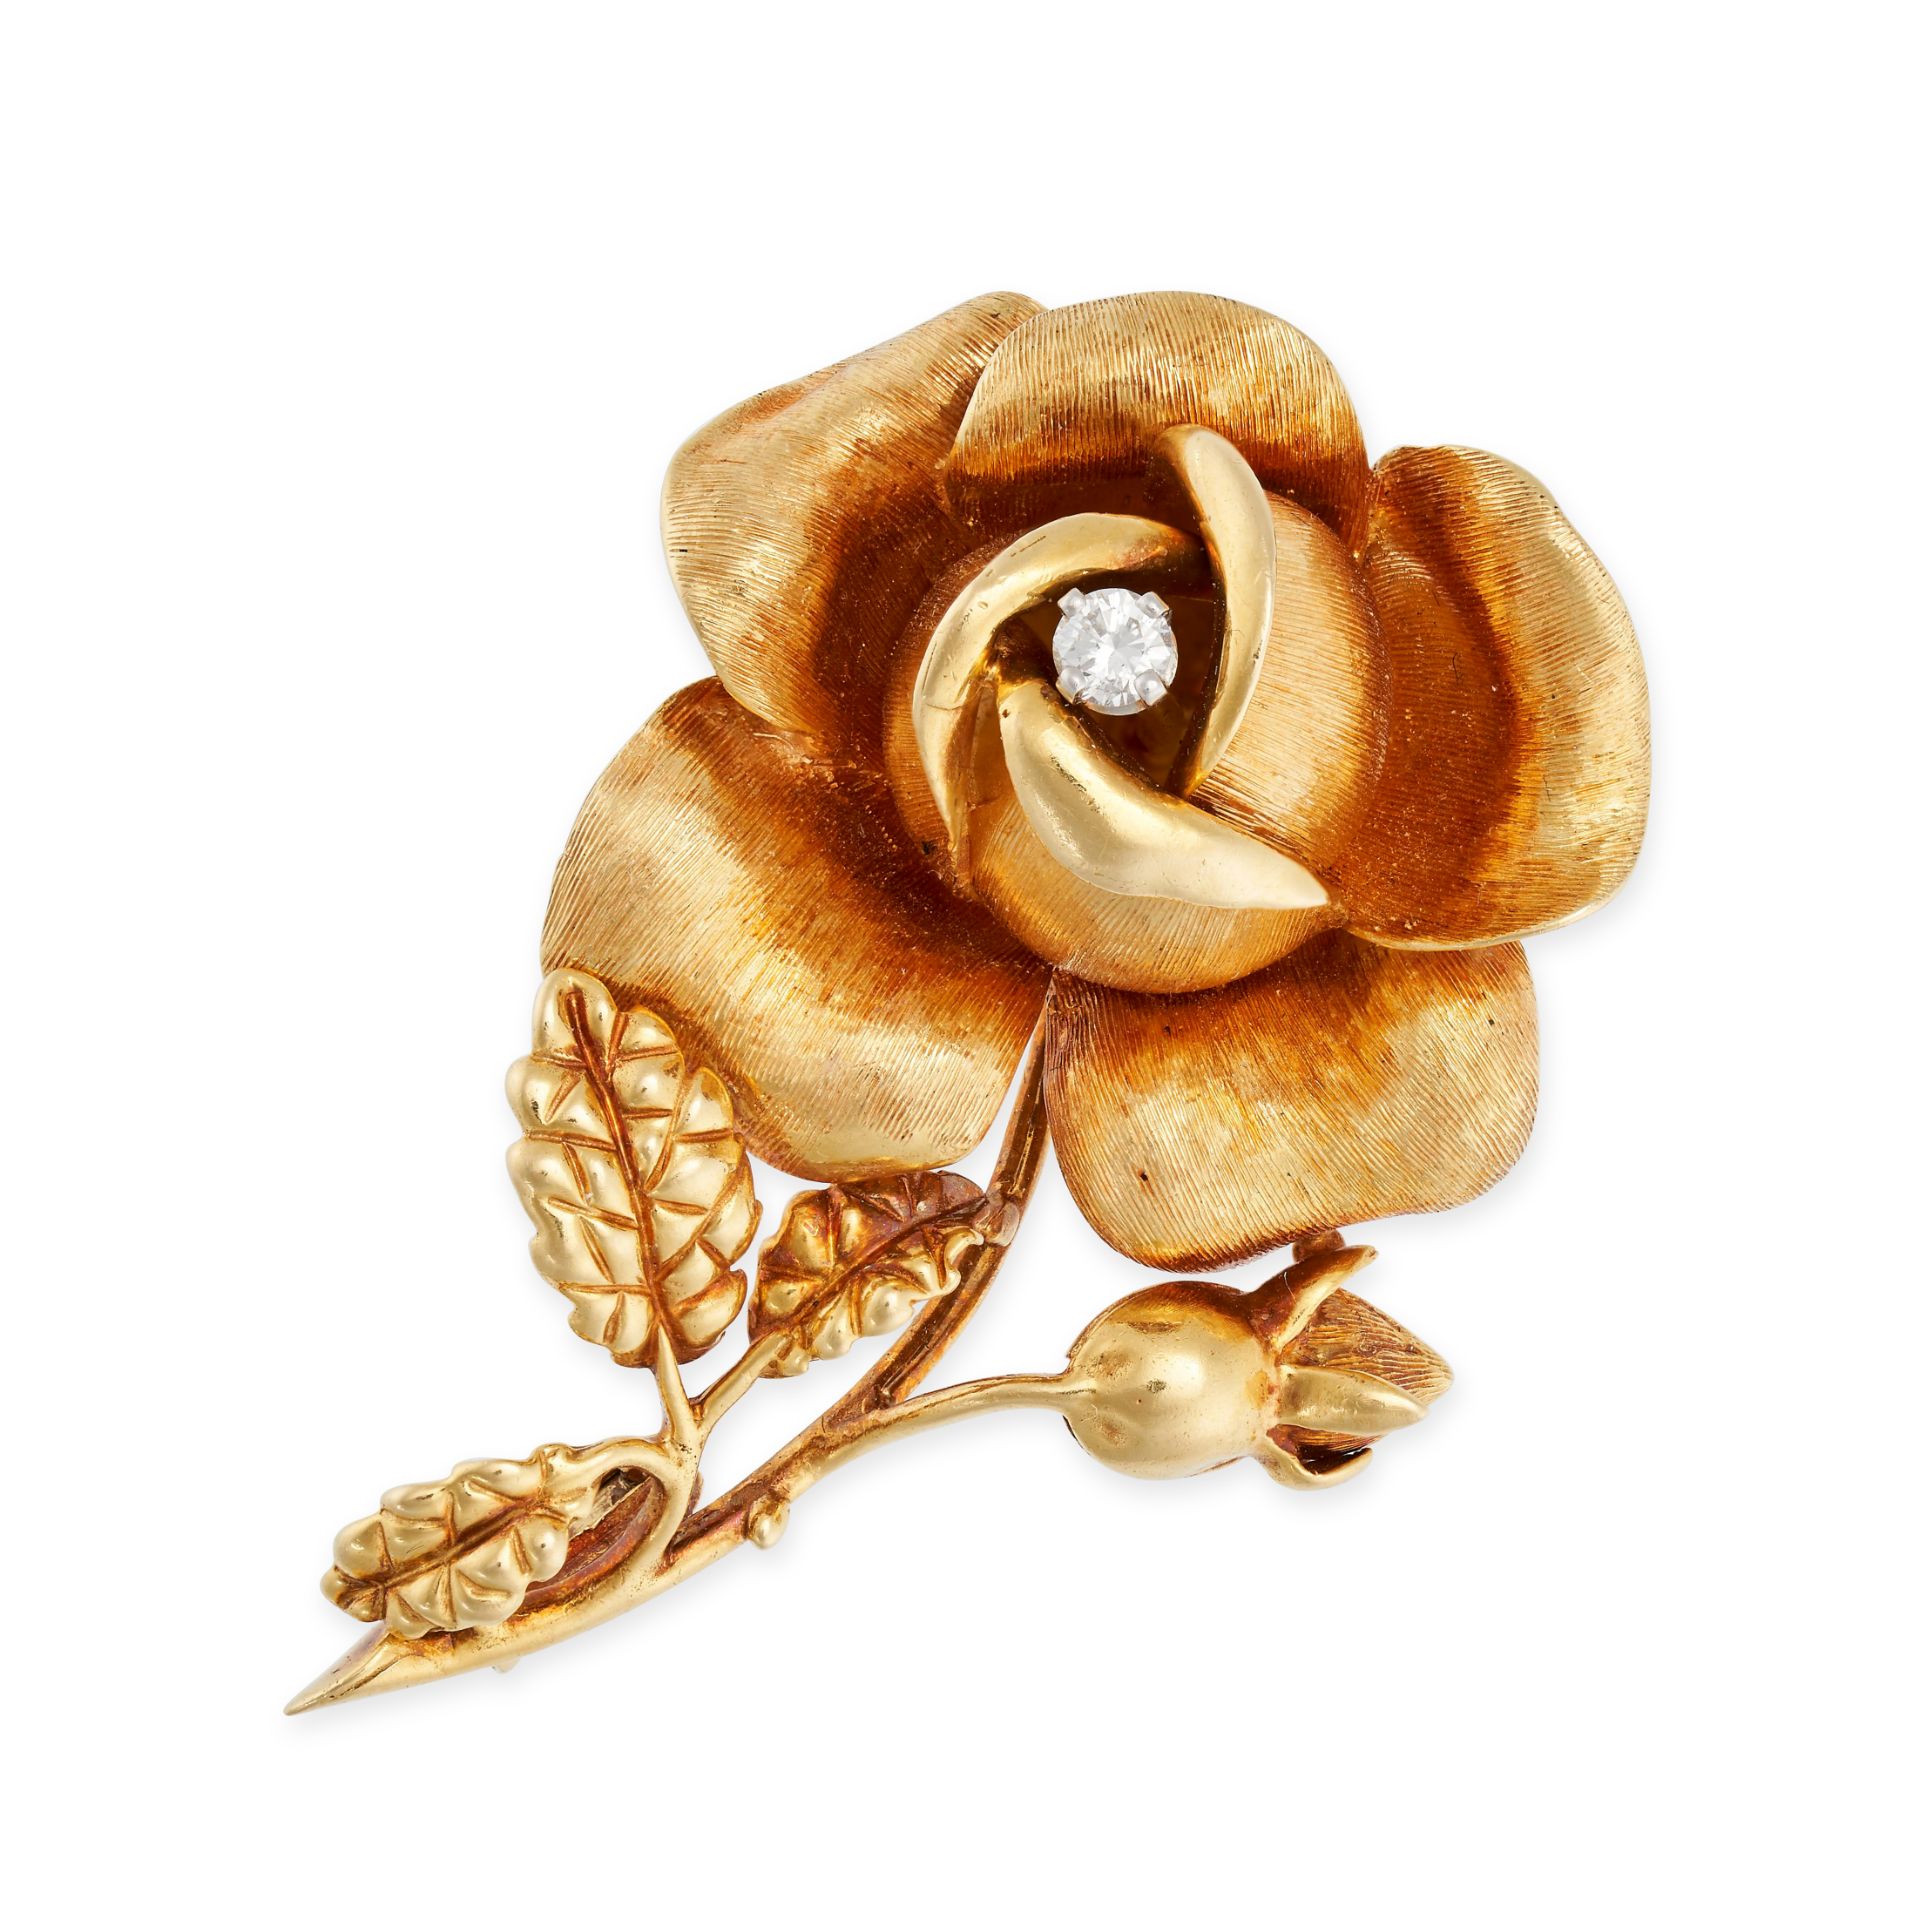 CARTIER, A VINTAGE DIAMOND ROSE BROOCH in 18ct yellow gold, designed as a rose with a flower and ...